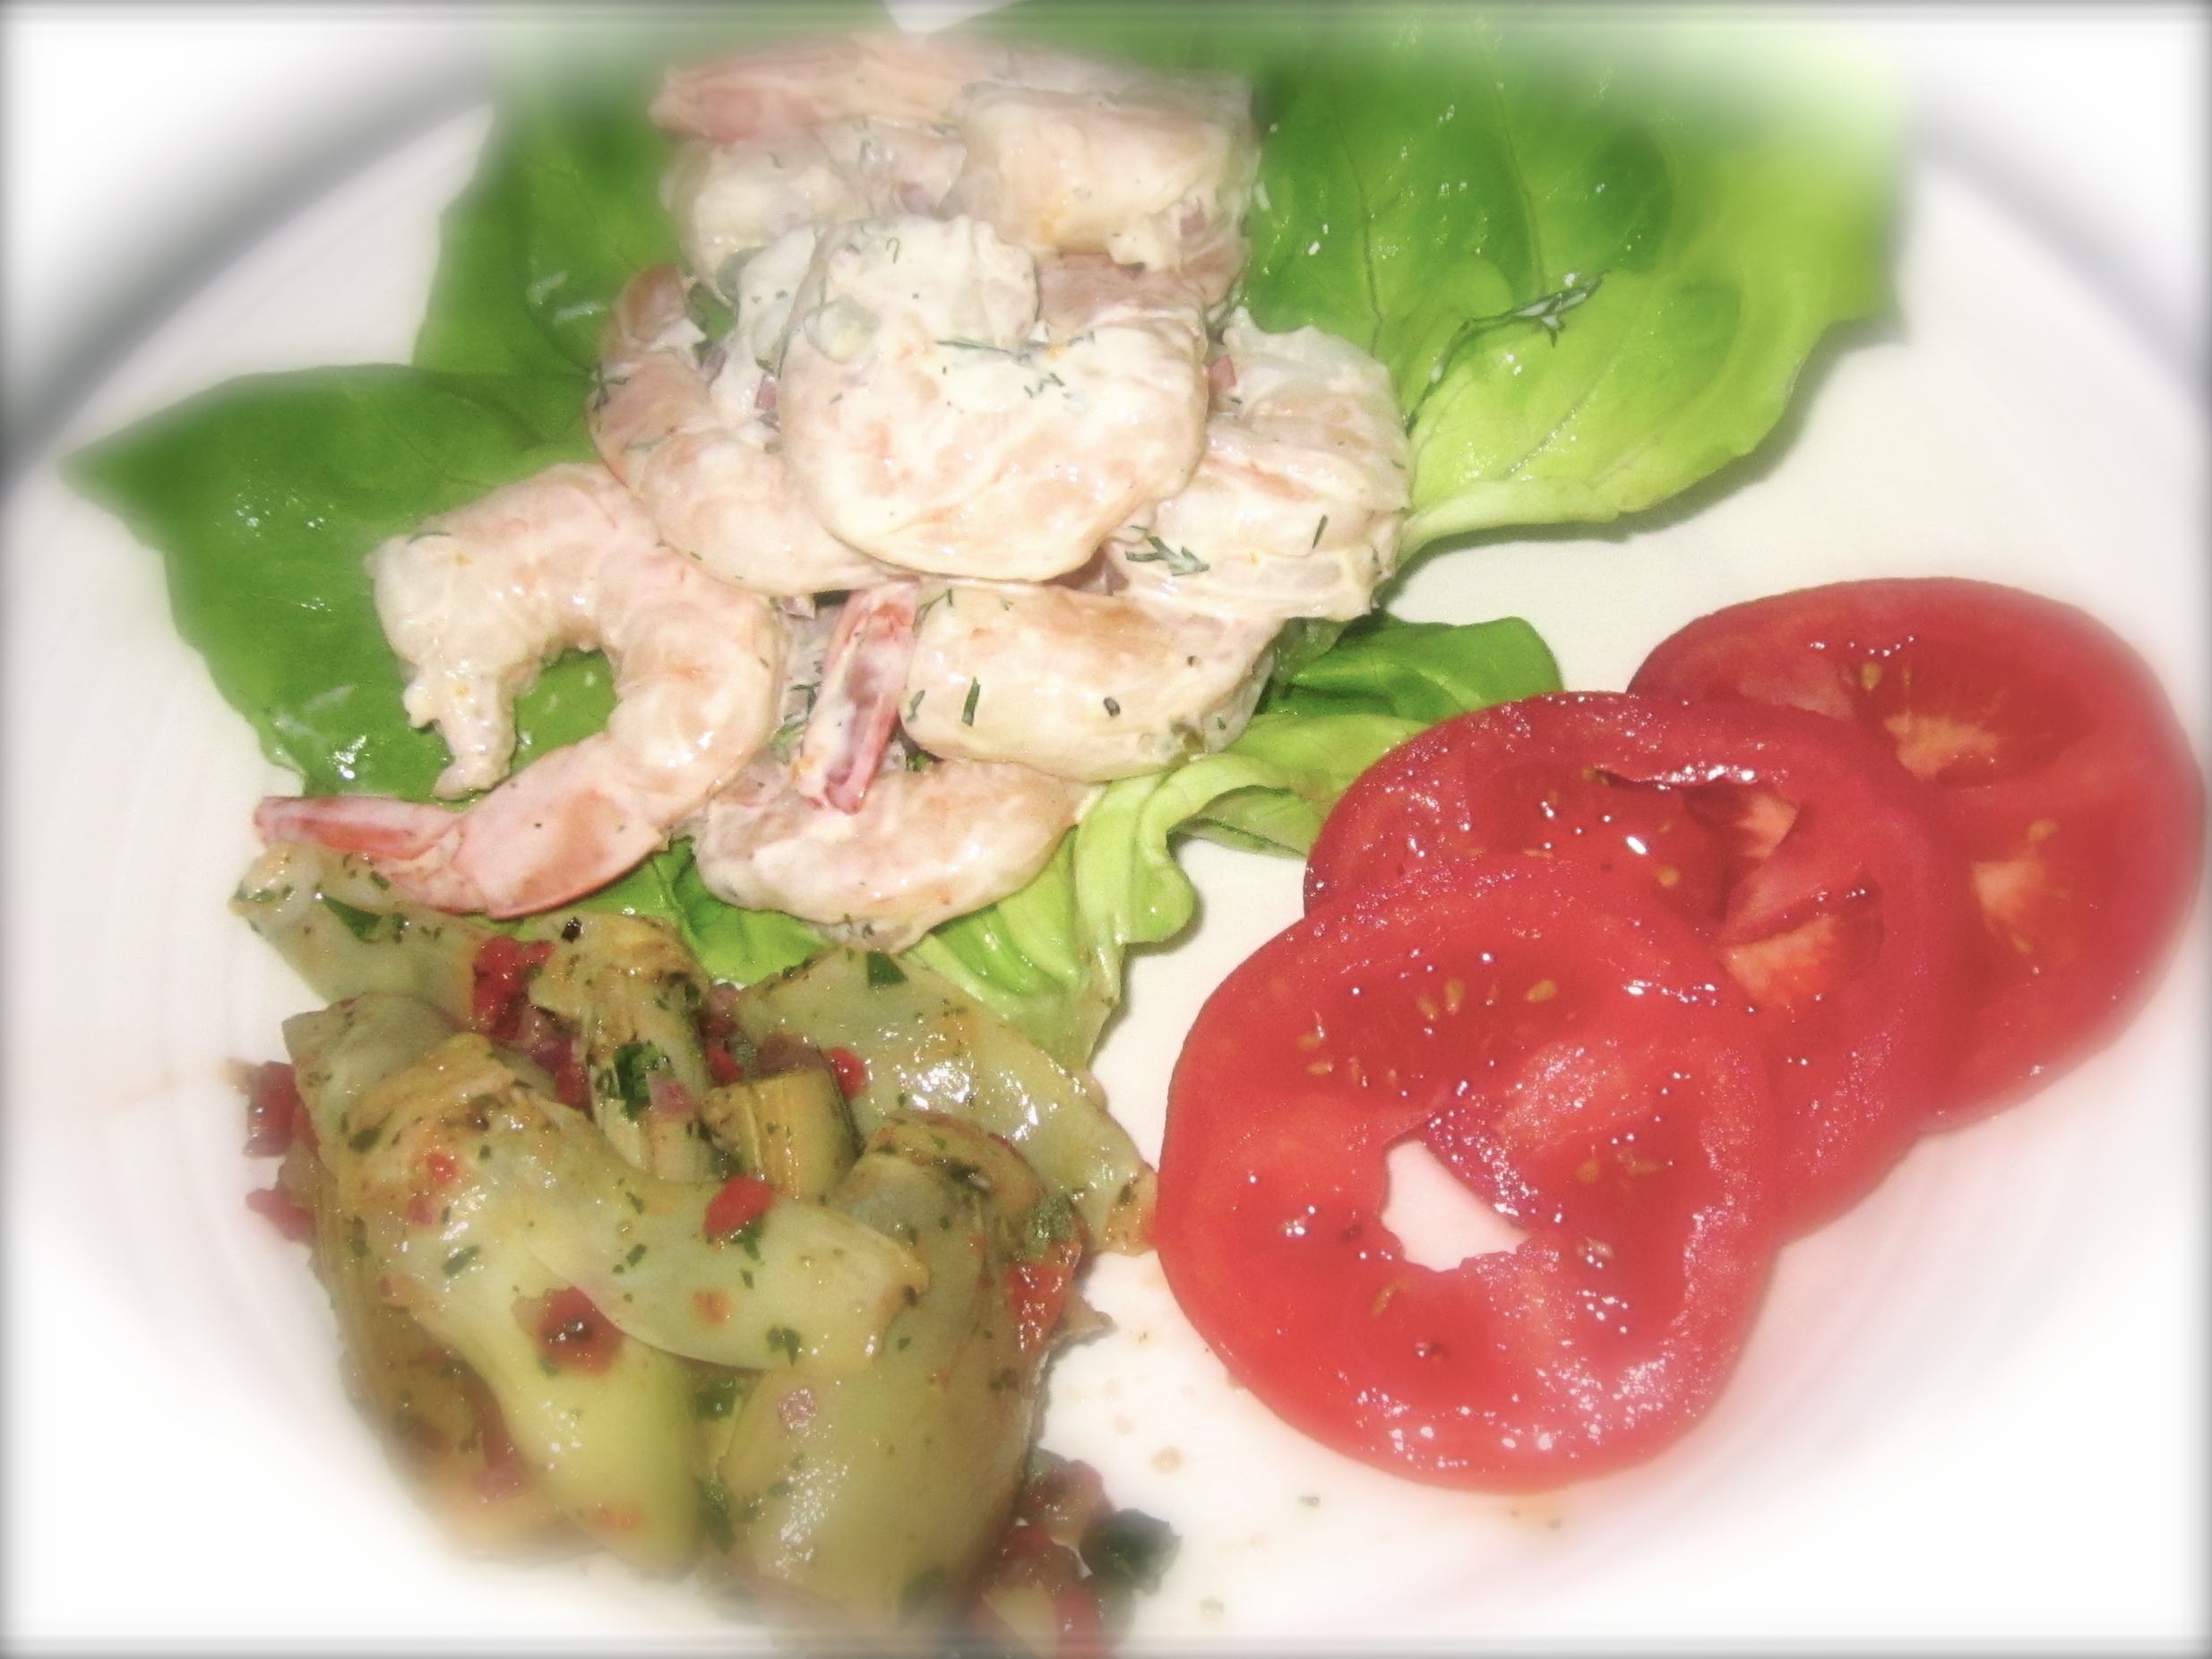 The best of the supper menu: Roasted Shrimp Salad, Roasted Artichoke Hearts and Colorado tomatoes.